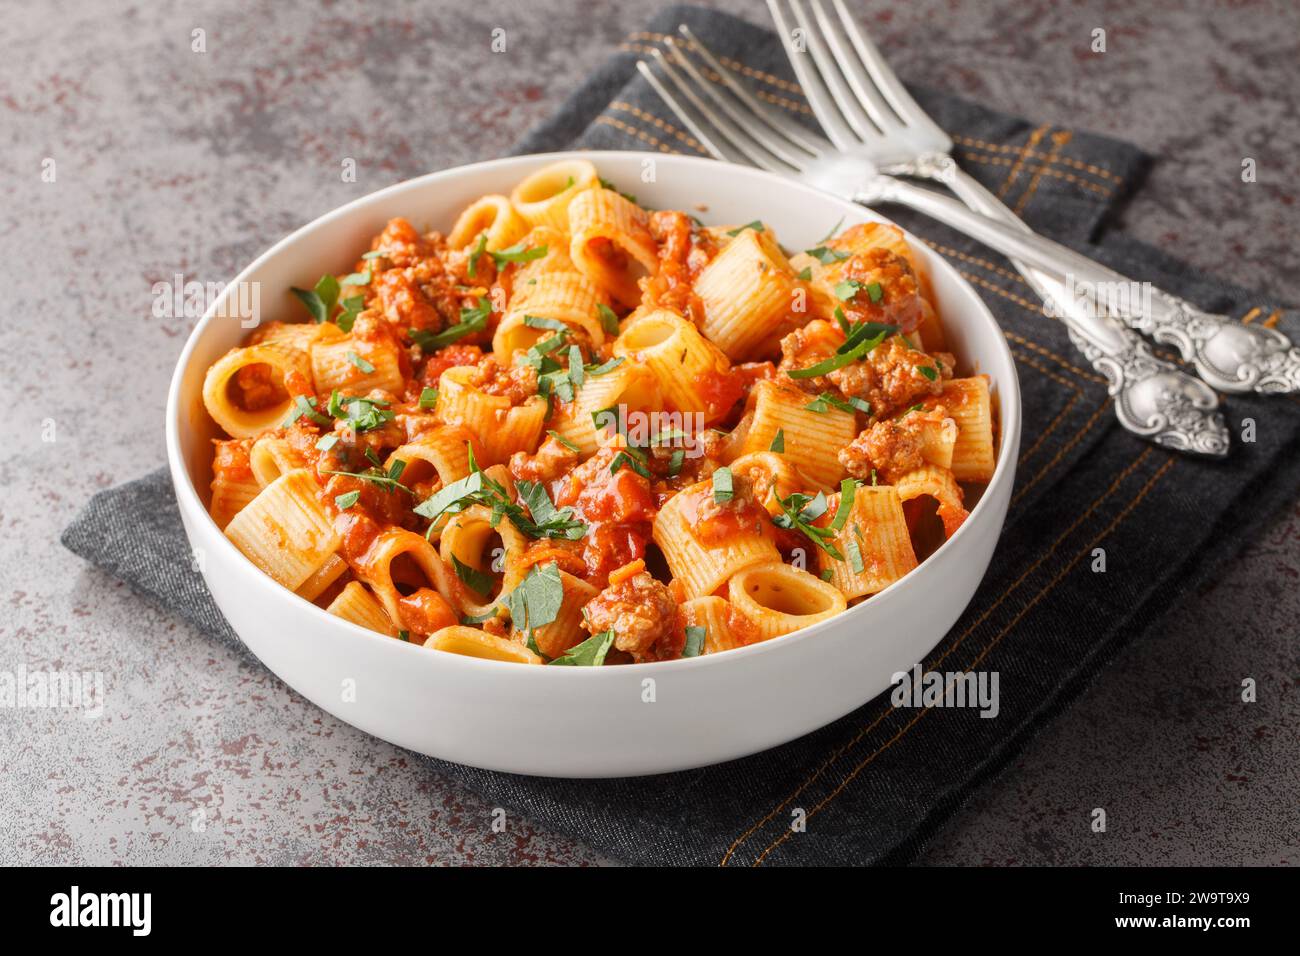 Pasta mezze maniche cooked with meat Bolognese sauce close-up in a plate on the table. Horizontal Stock Photo